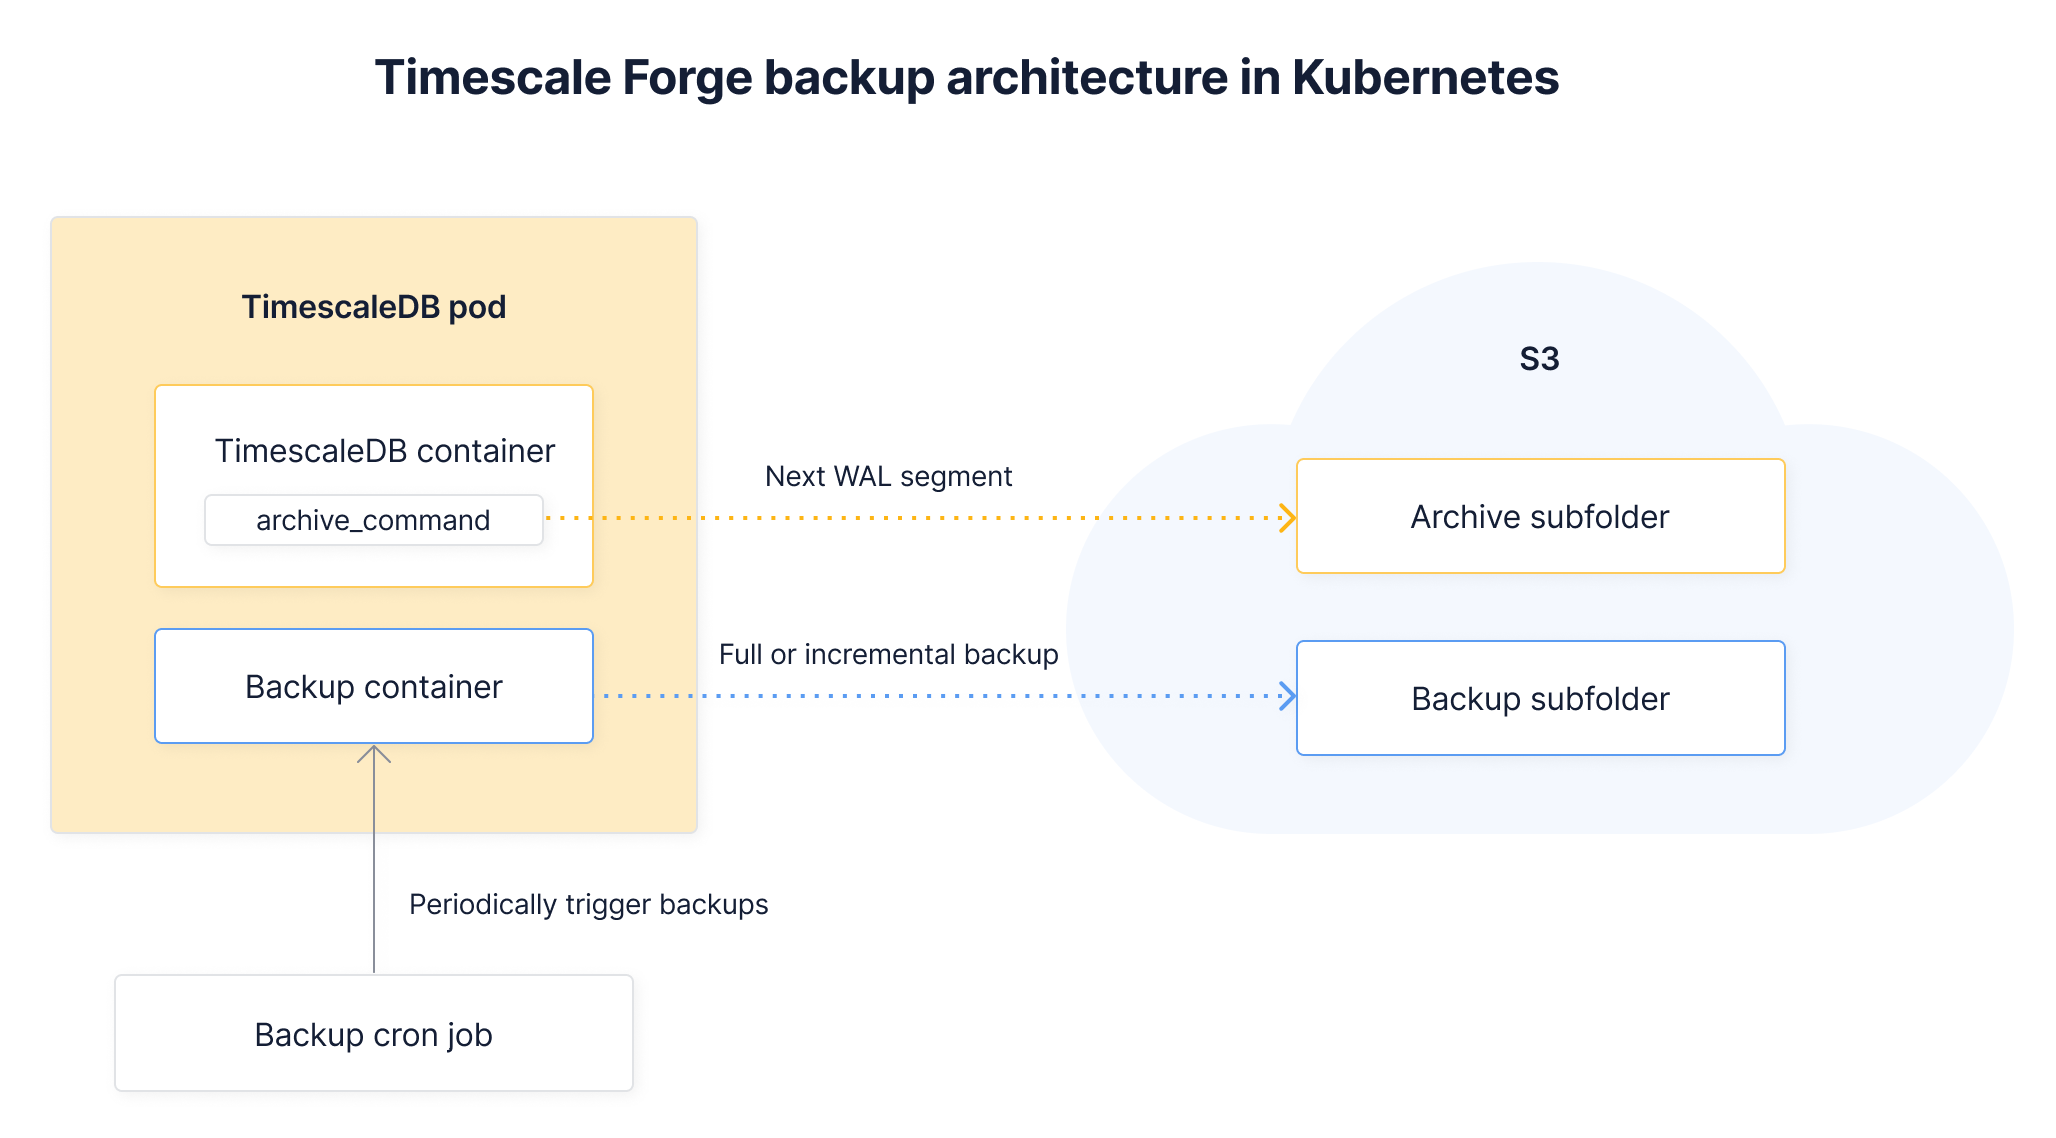  Architecture diagram of how Timescale Forge backups are done in Kubernetes.